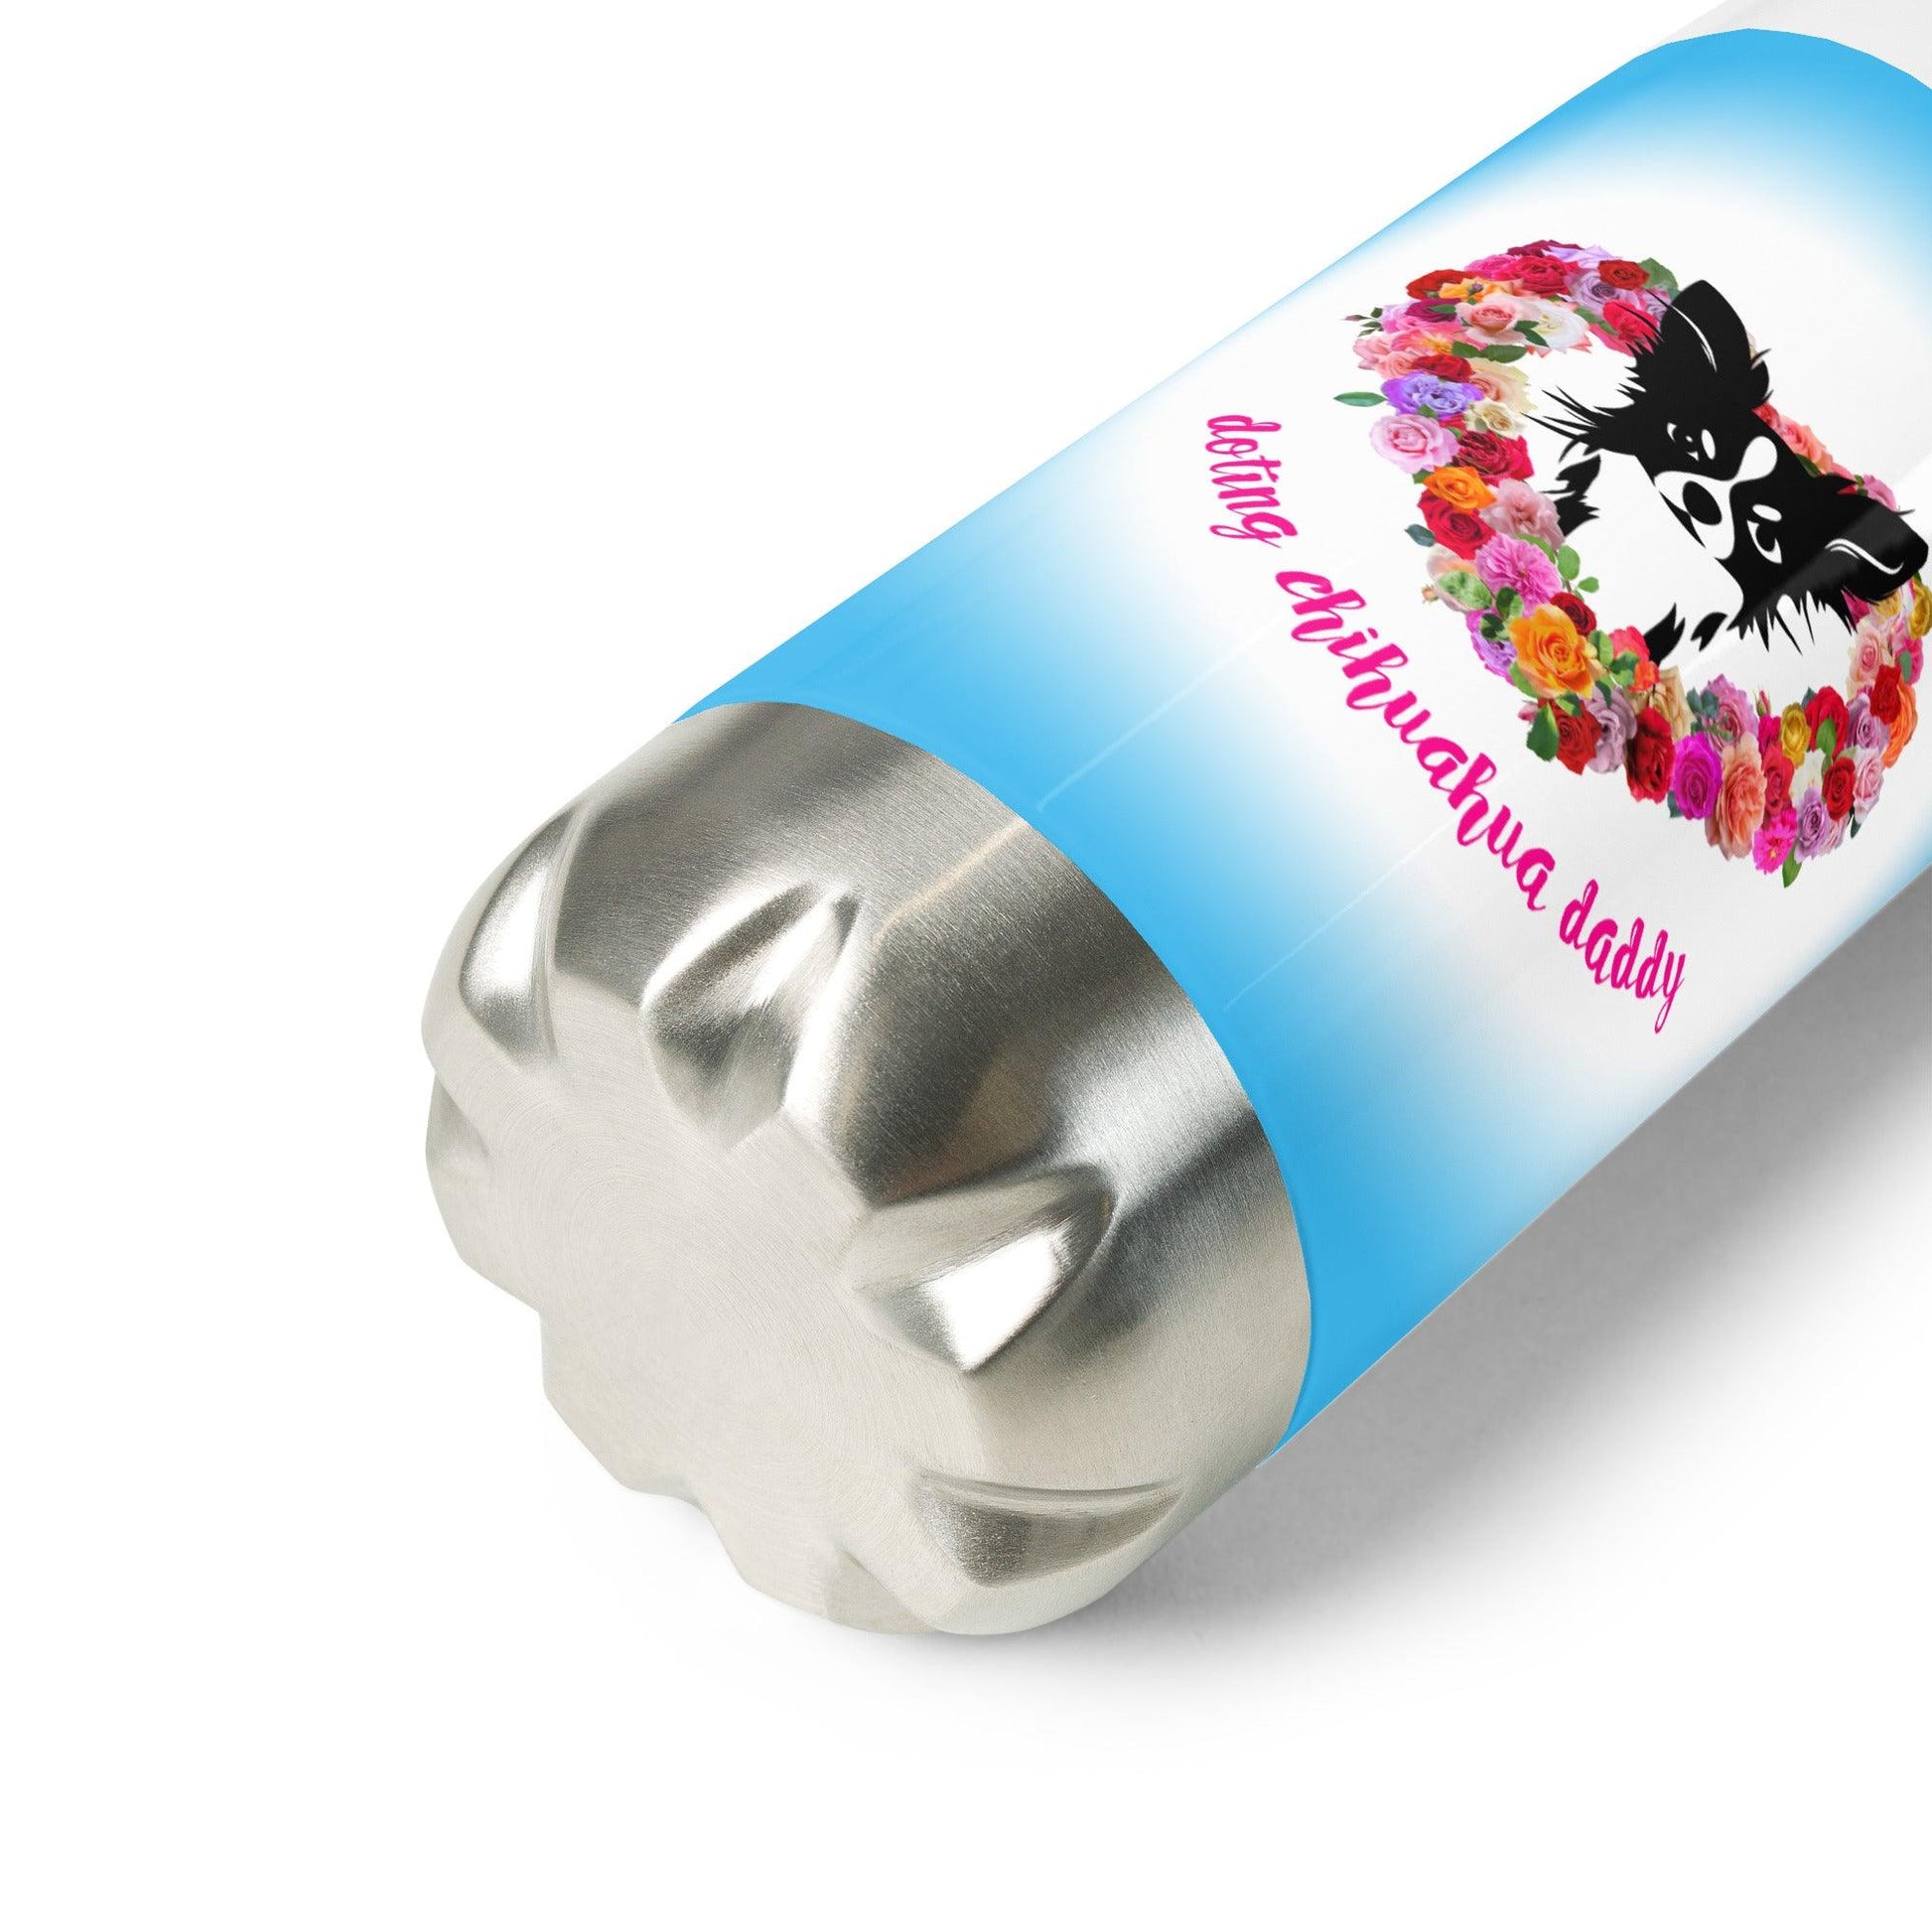 Doting Chihuahua Daddy 500ml double-walled stainless steel vacuum flask / water bottle with leak-proof cap. Keeps drinks hot or cold up to 6 hours. Real men love chihuahuas. Chihuahua daddies are sexy! Forget guns and roses; Chimigos gives you chihuahuas and roses. Divine. Adorable. Slay. SEXY! This chihuahua and roses bottle make the perfect Father's Day / birthday / Christmas gift for a doting chihuahua daddy. Design by Renate Kriegler for Chimigos.